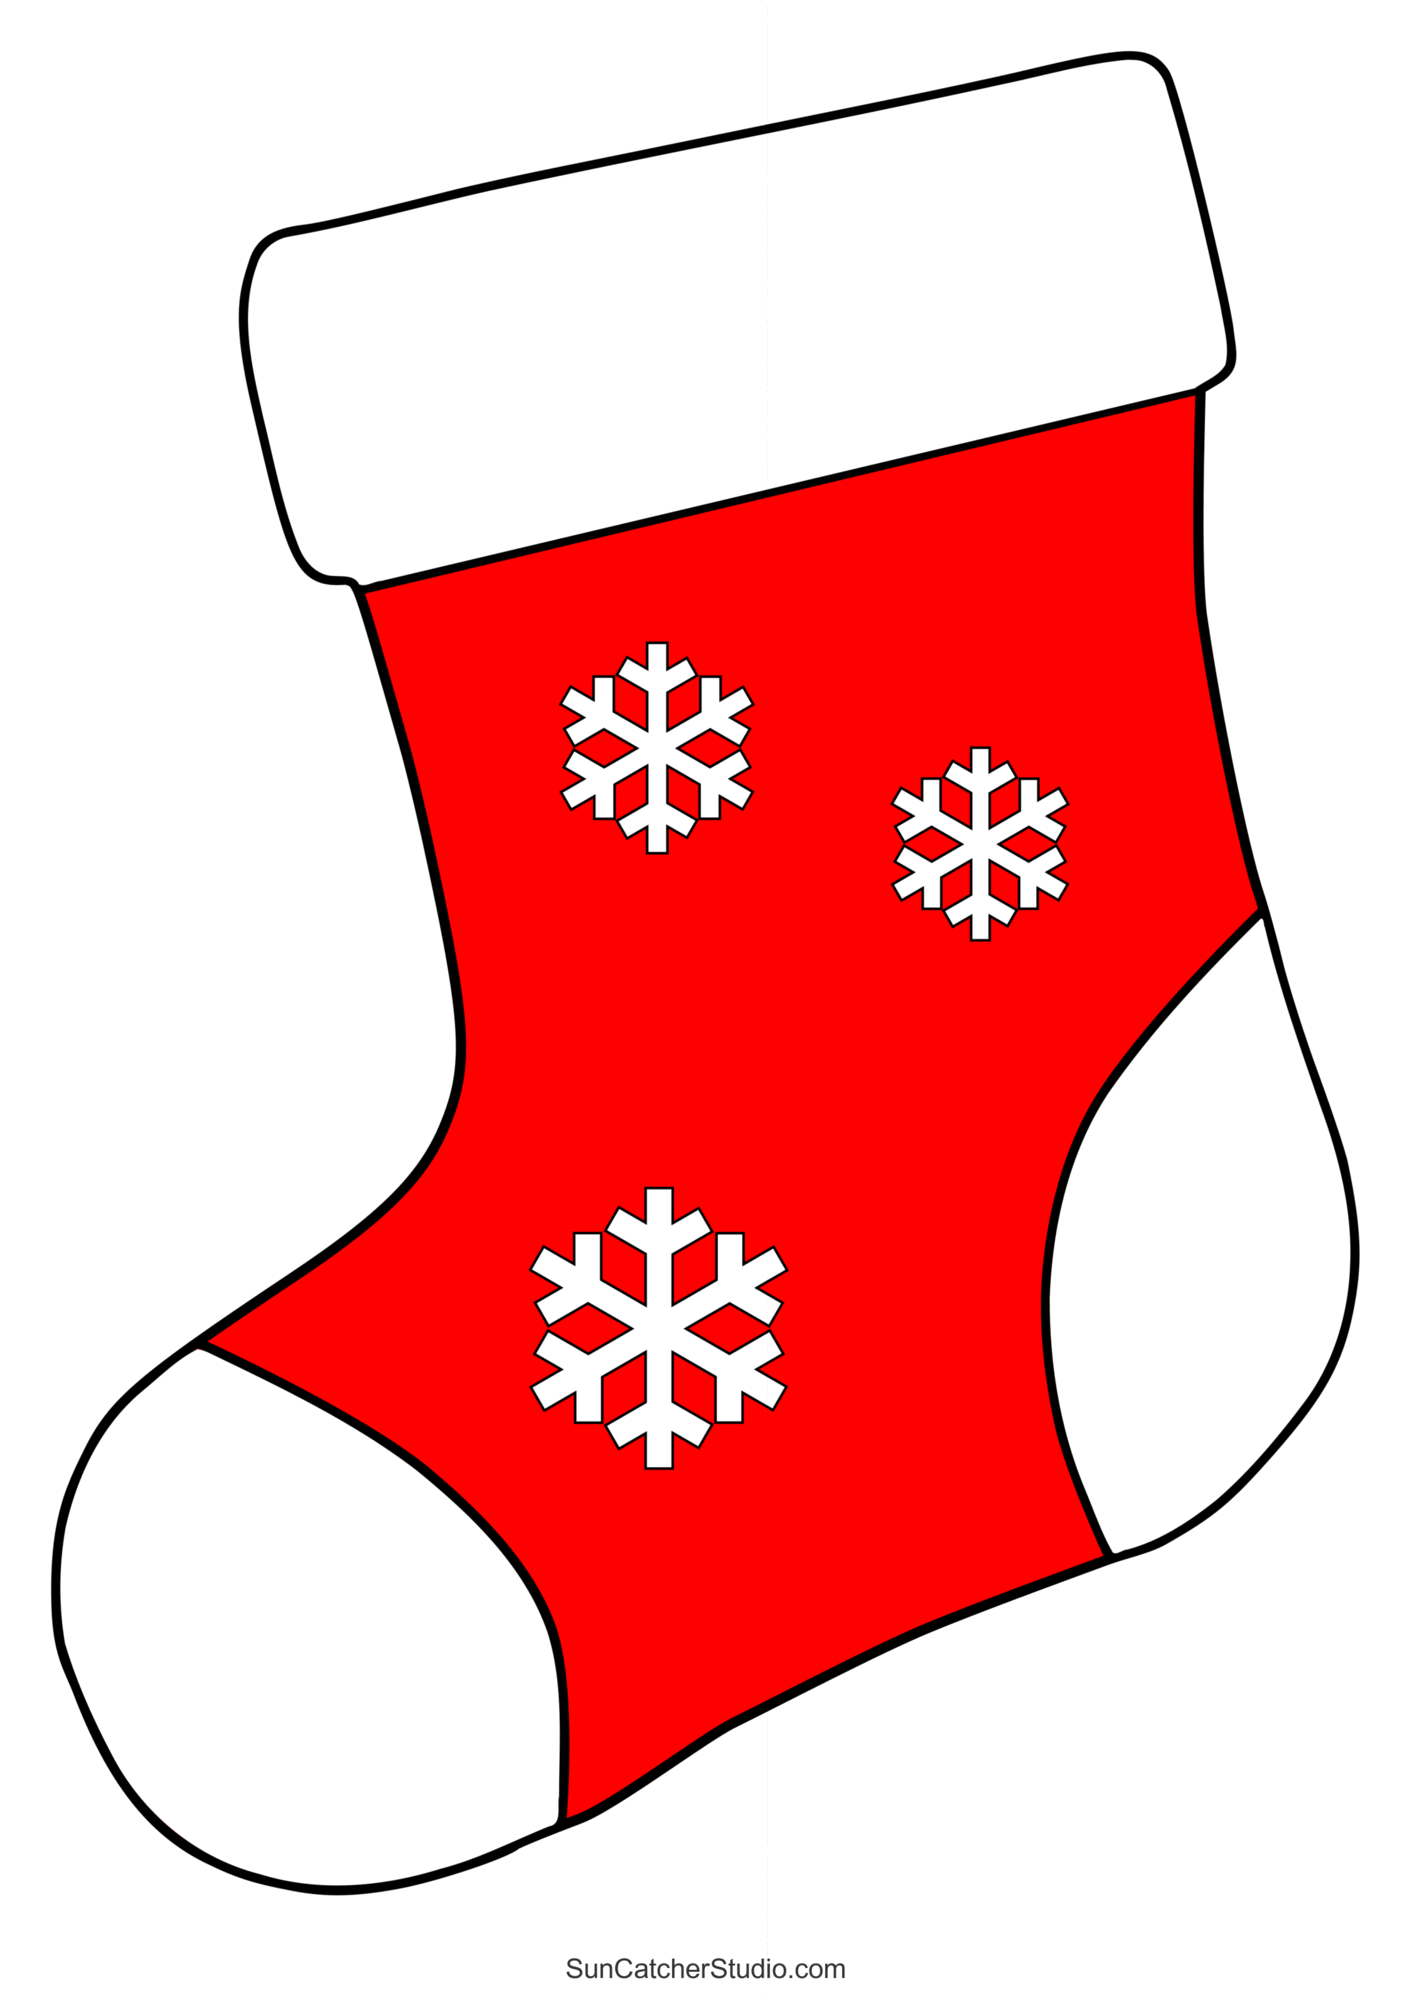 Free Printable Stocking Pattern (Template for Christmas) - Bloom